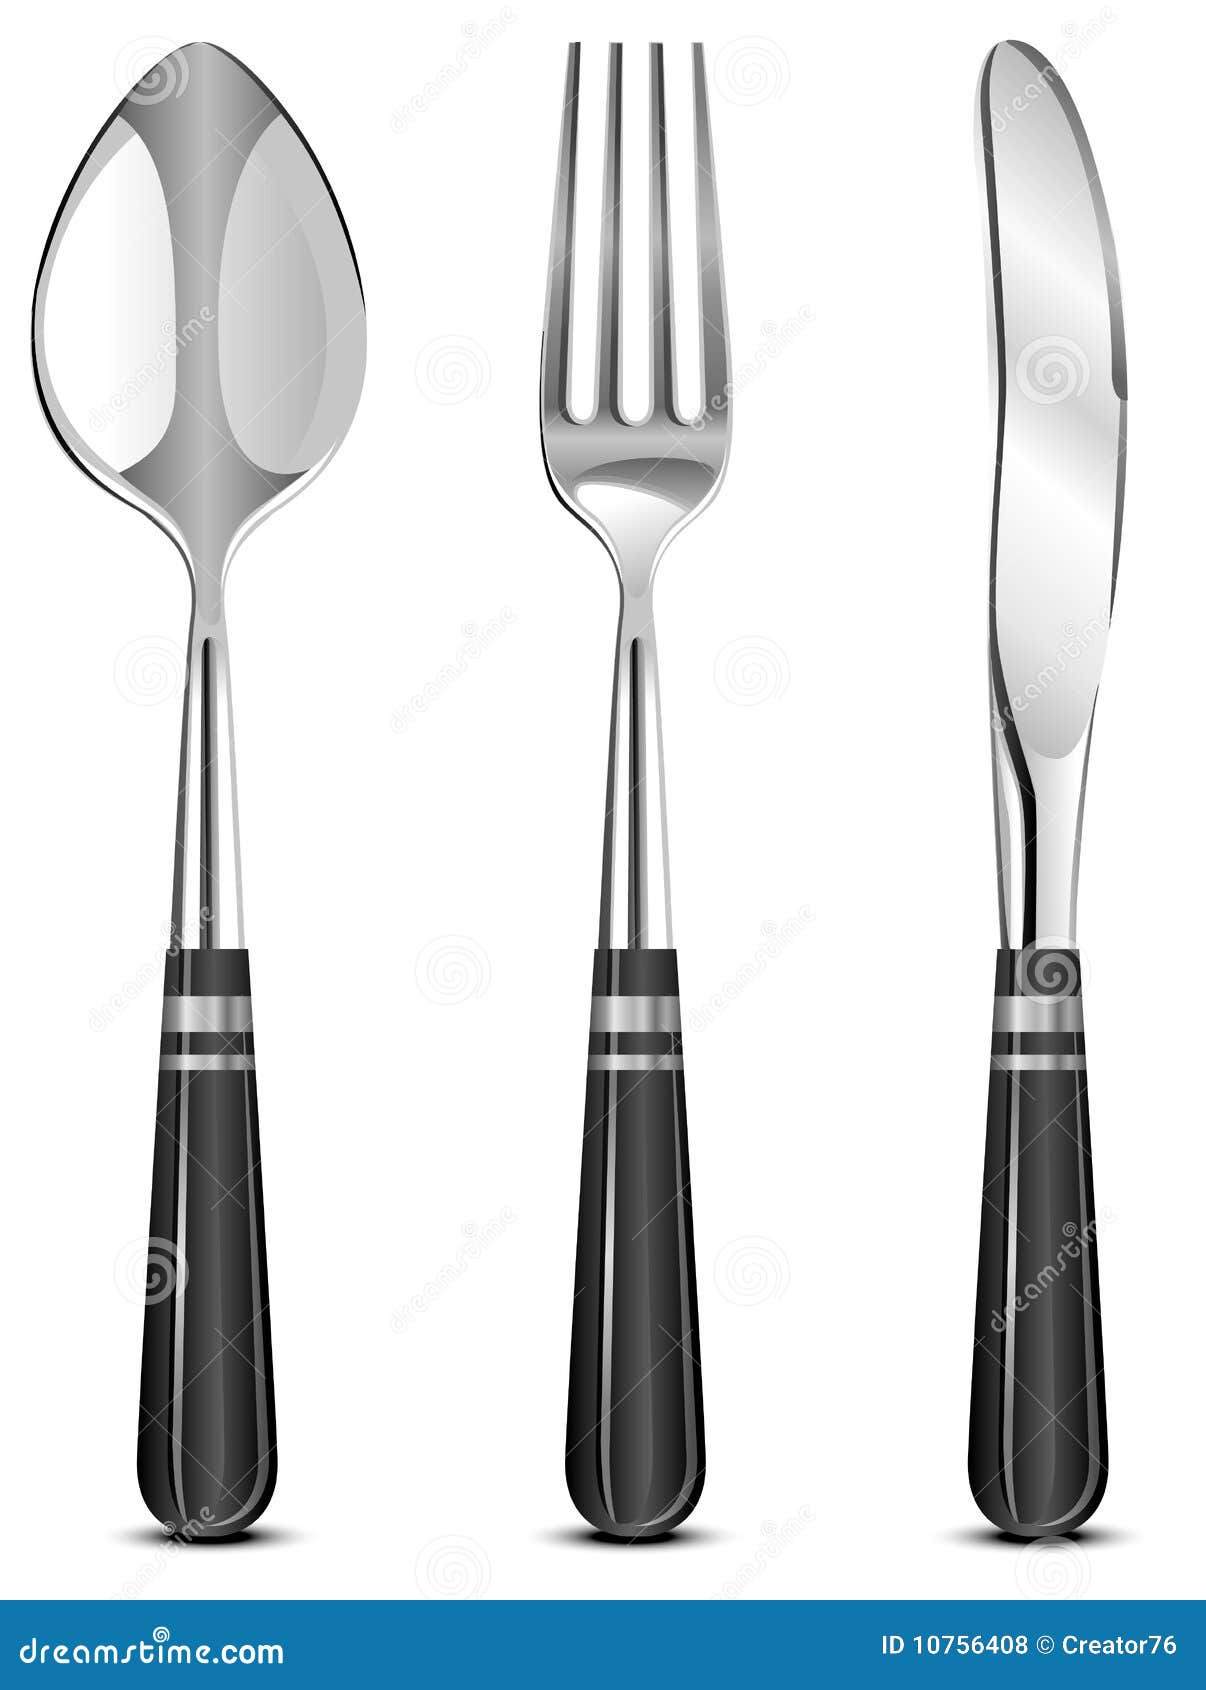 spoon, fork and knife